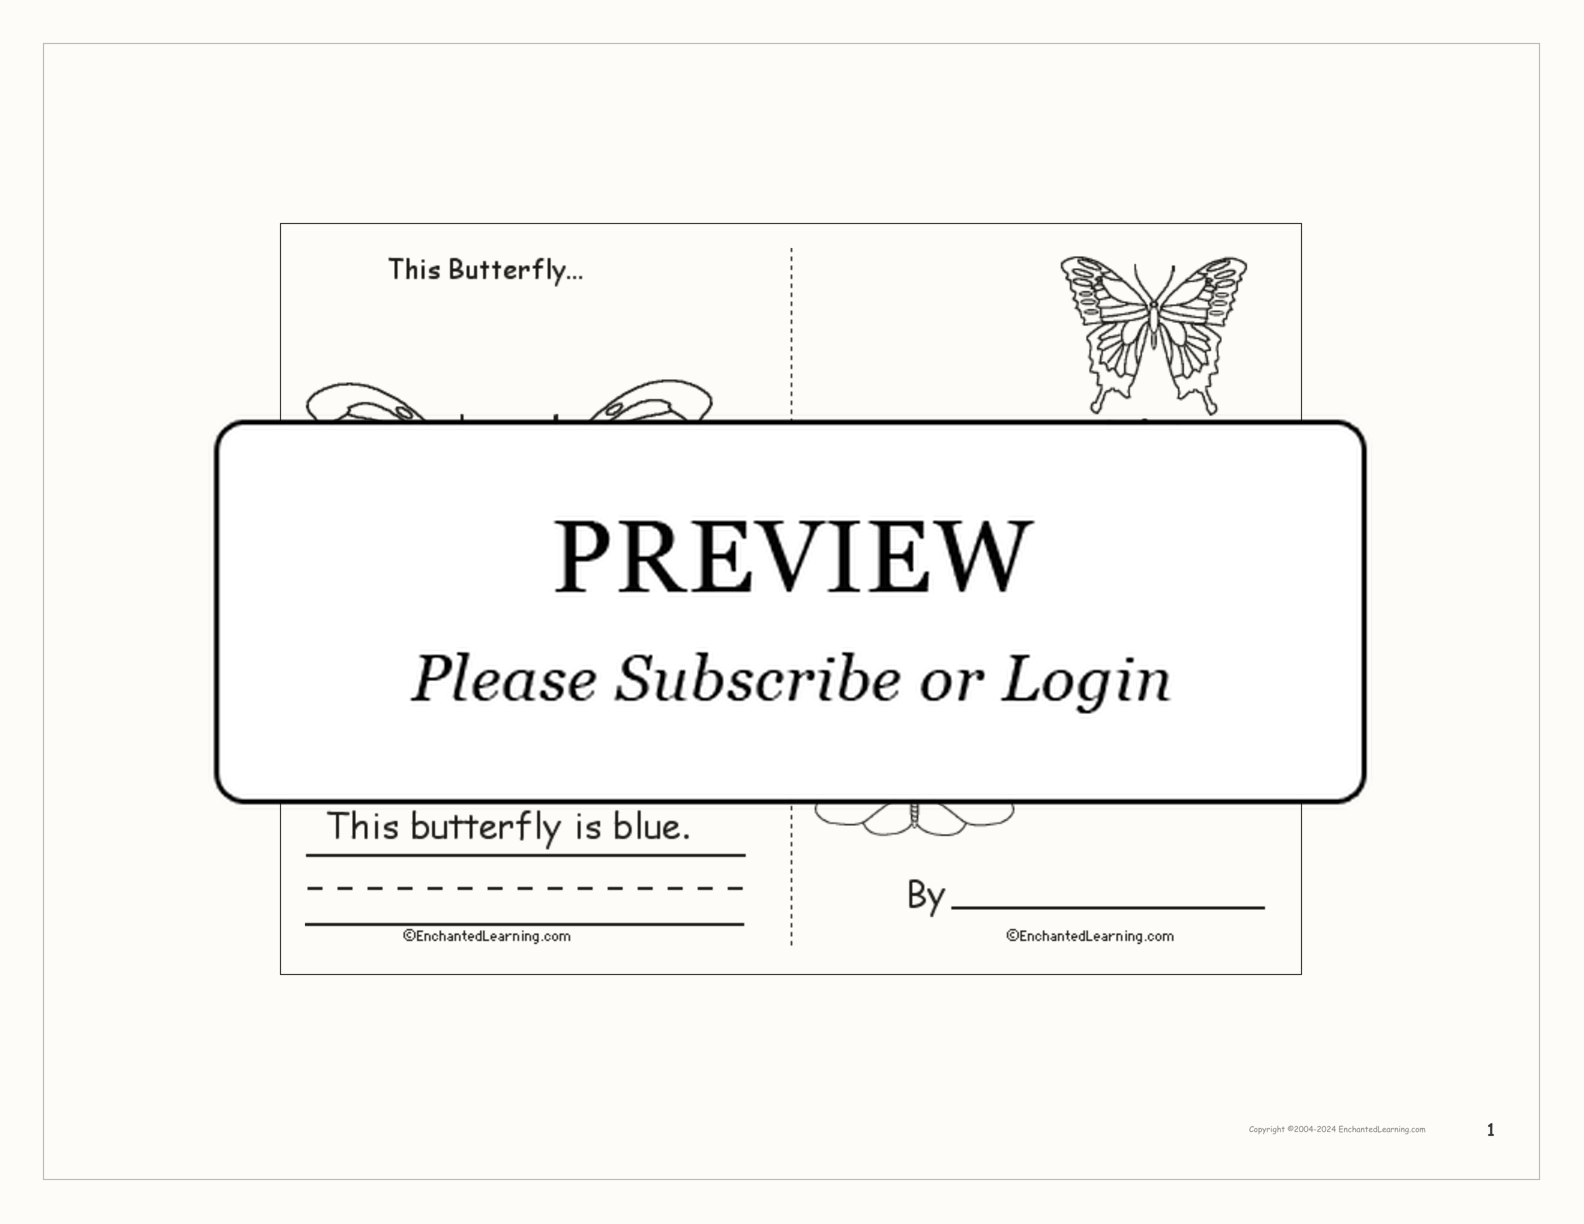 This Butterfly... Printable Book interactive printout page 1